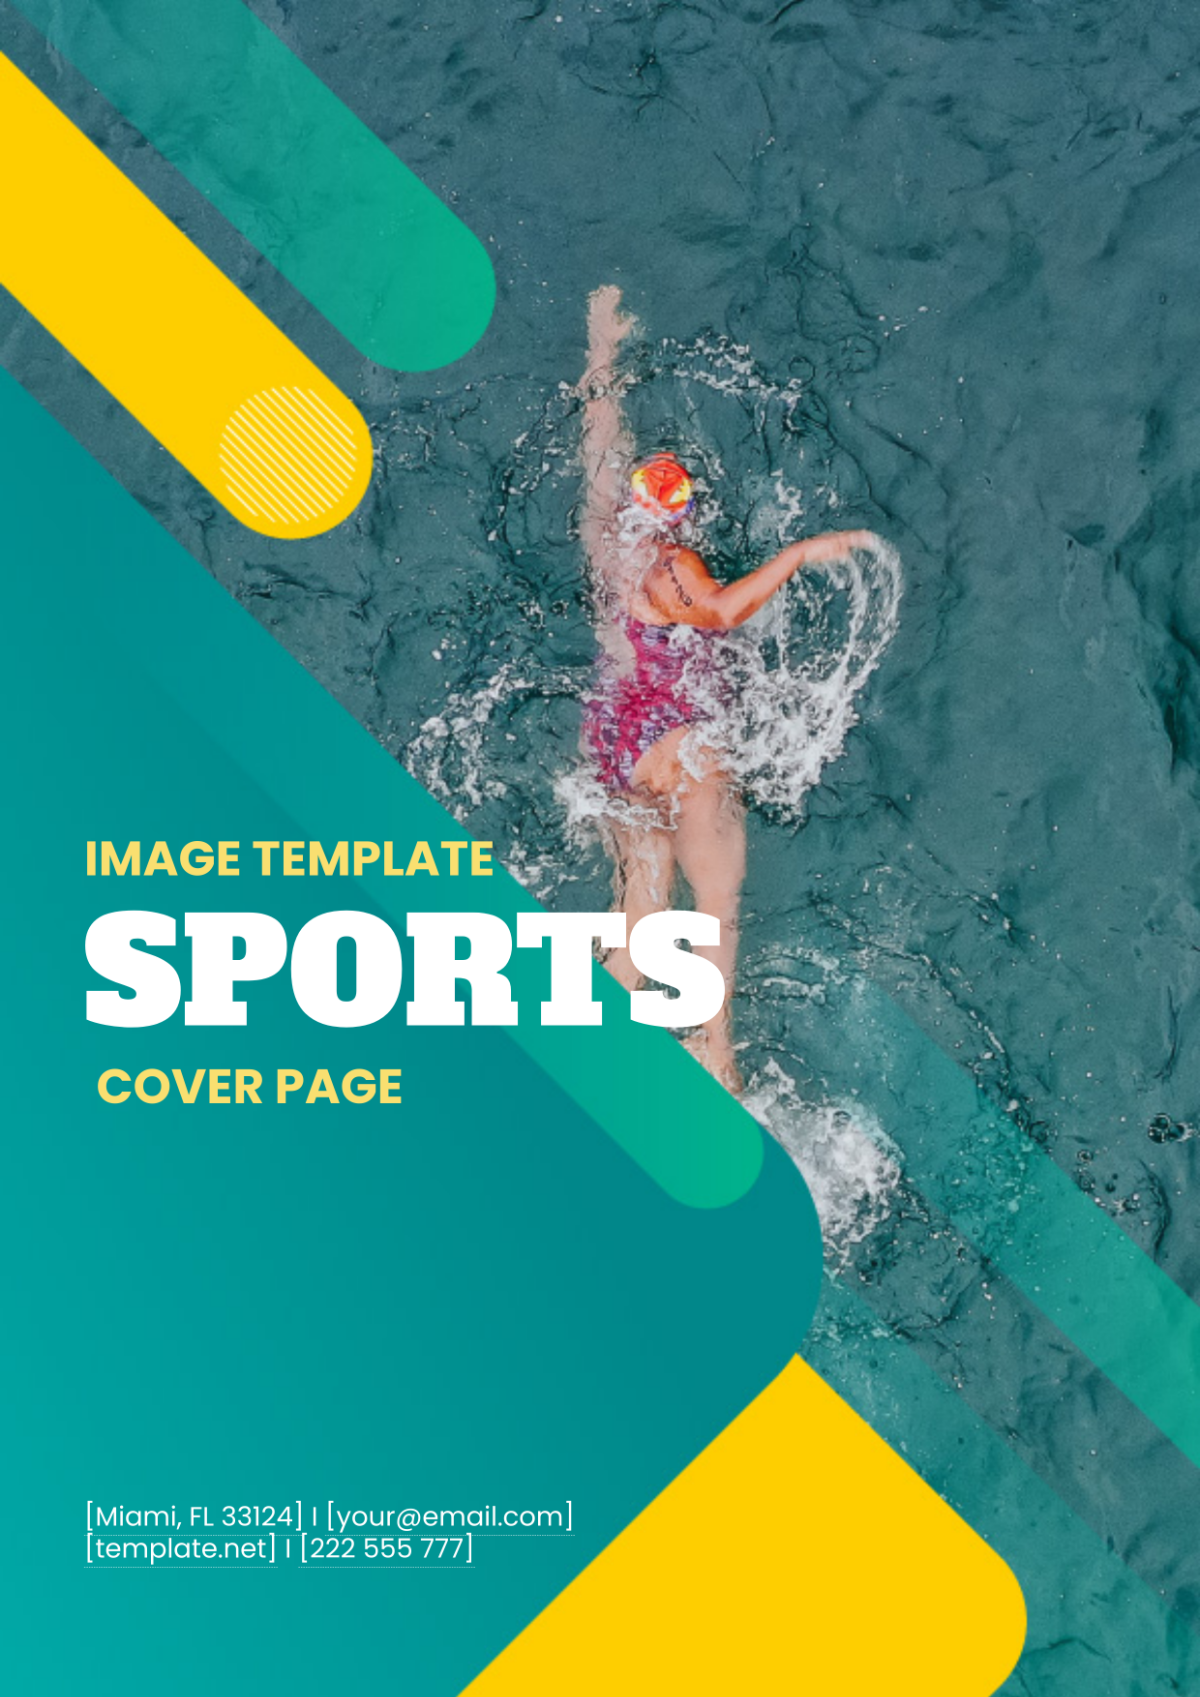 Sports Cover Page Image Template